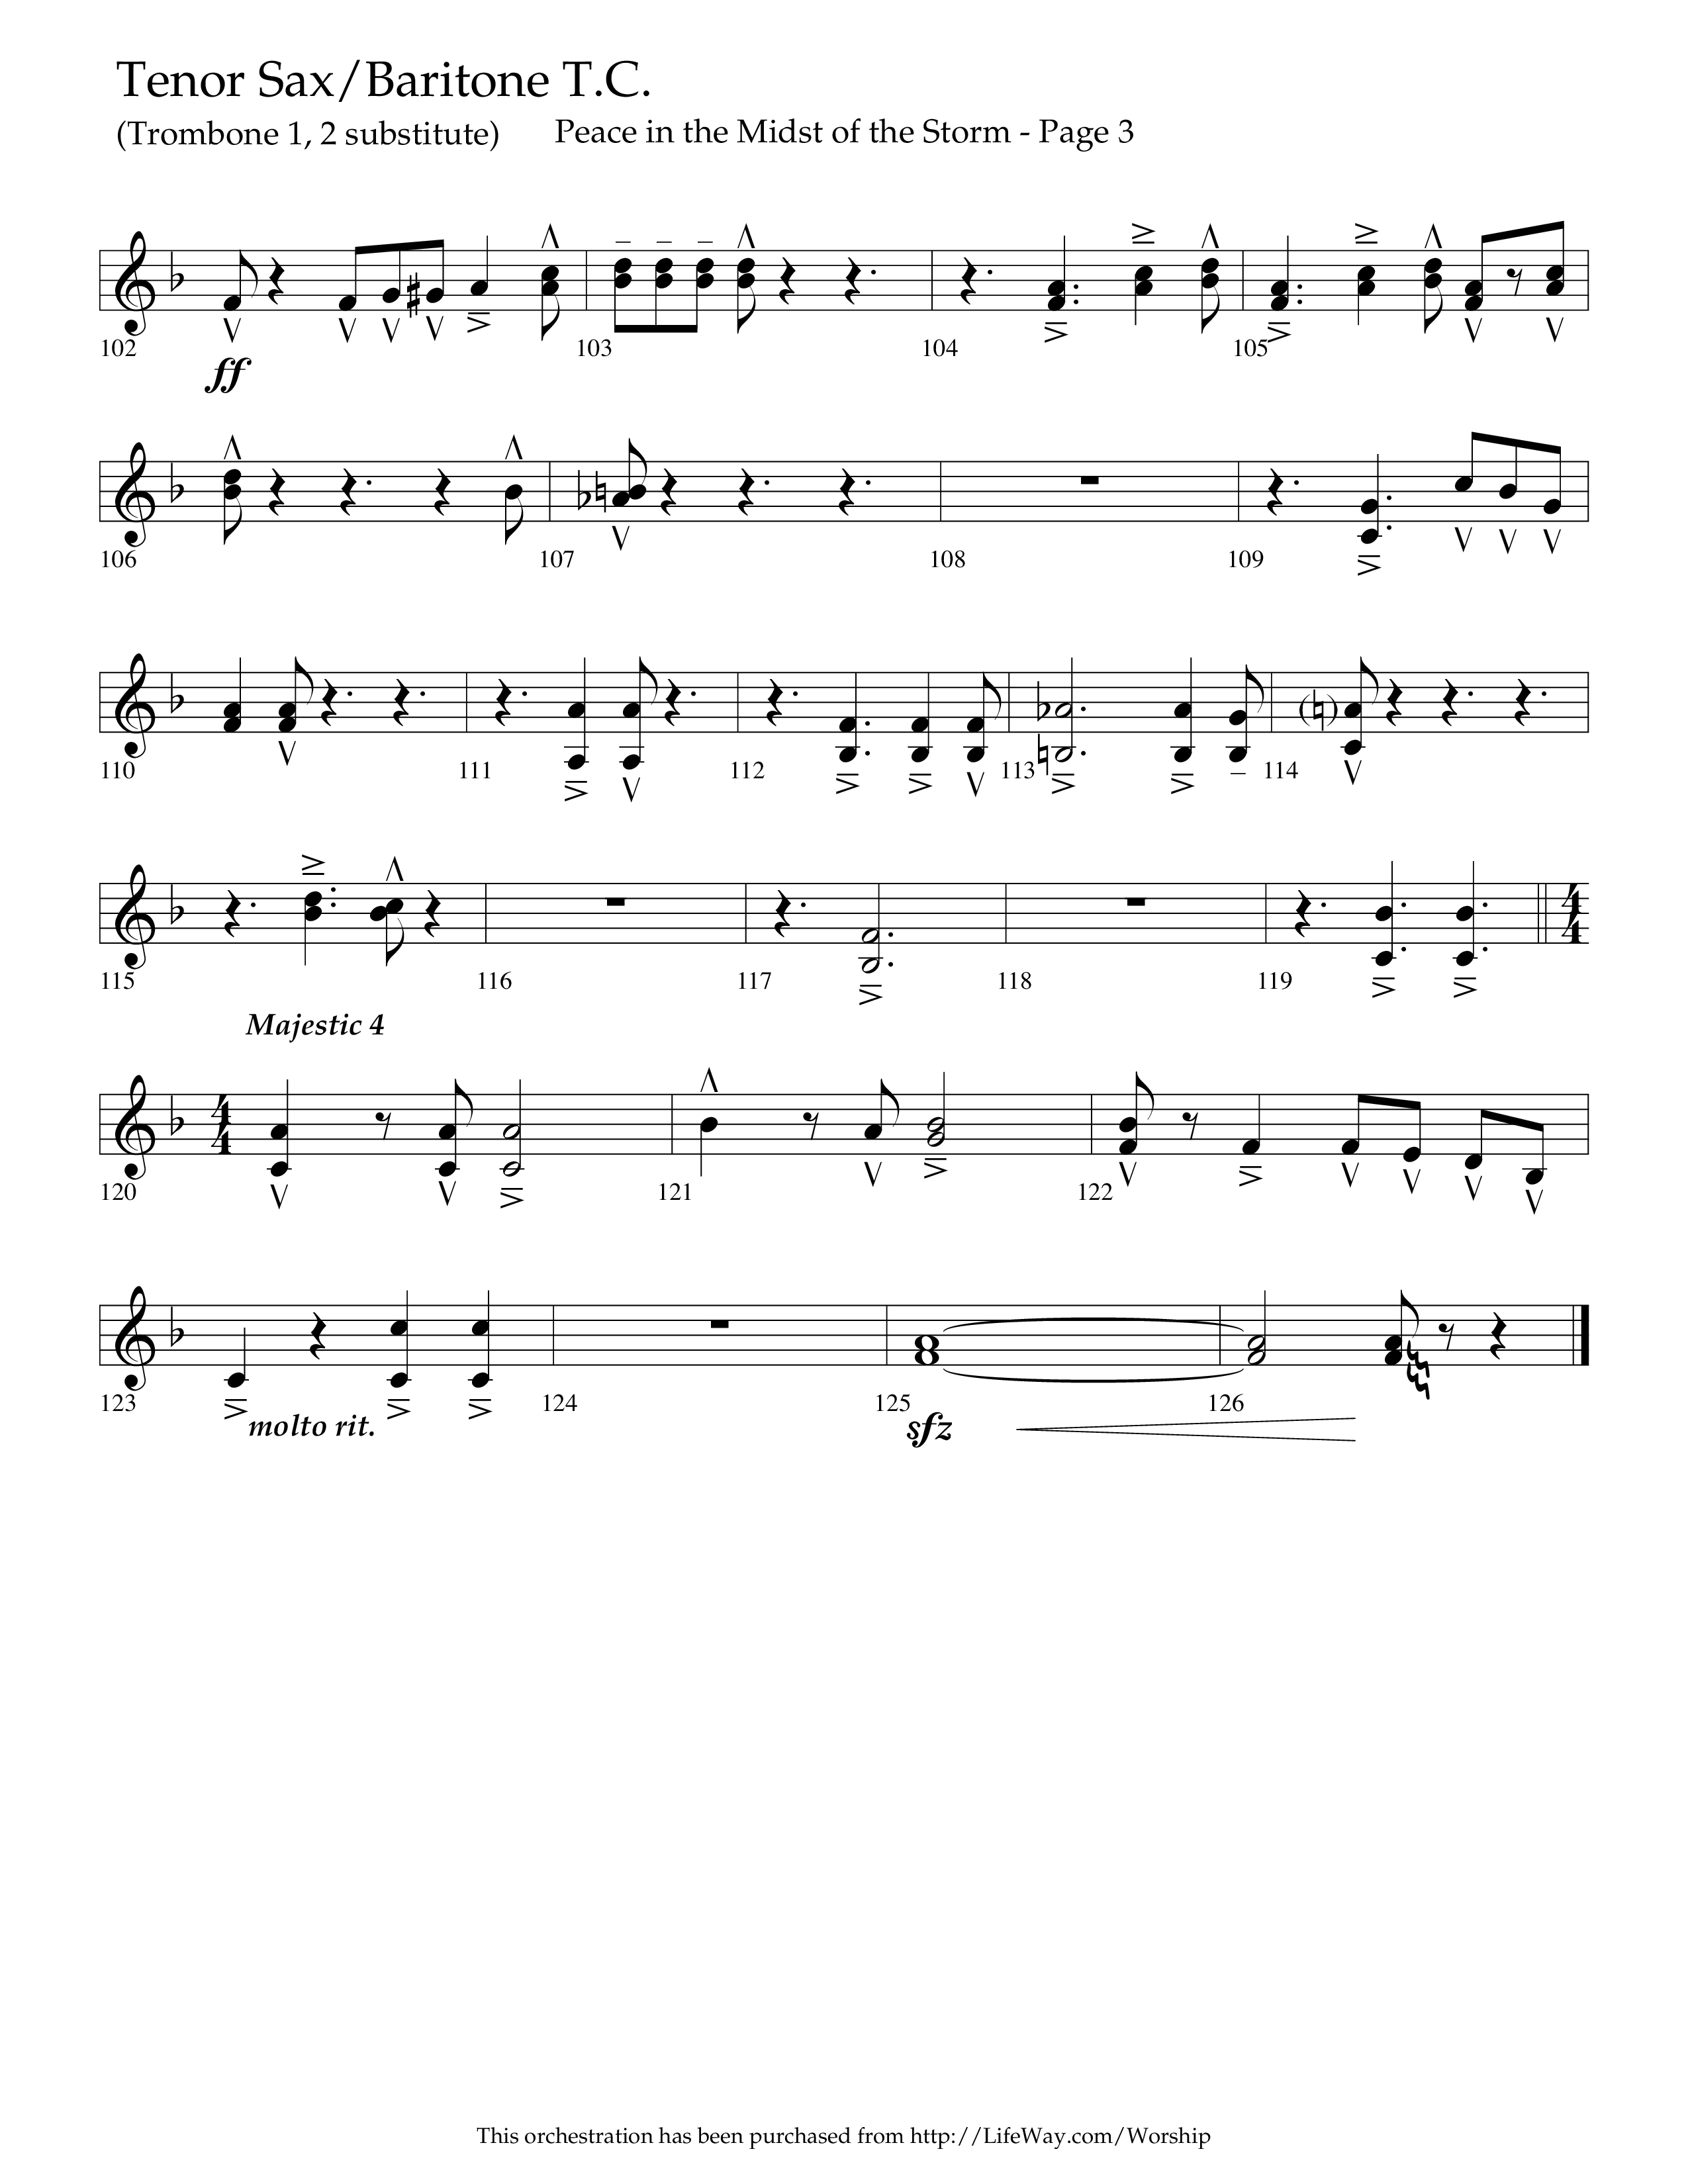 Peace In The Midst Of The Storm (Choral Anthem SATB) Tenor Sax/Baritone T.C. (Lifeway Choral / Arr. David T. Clydesdale)